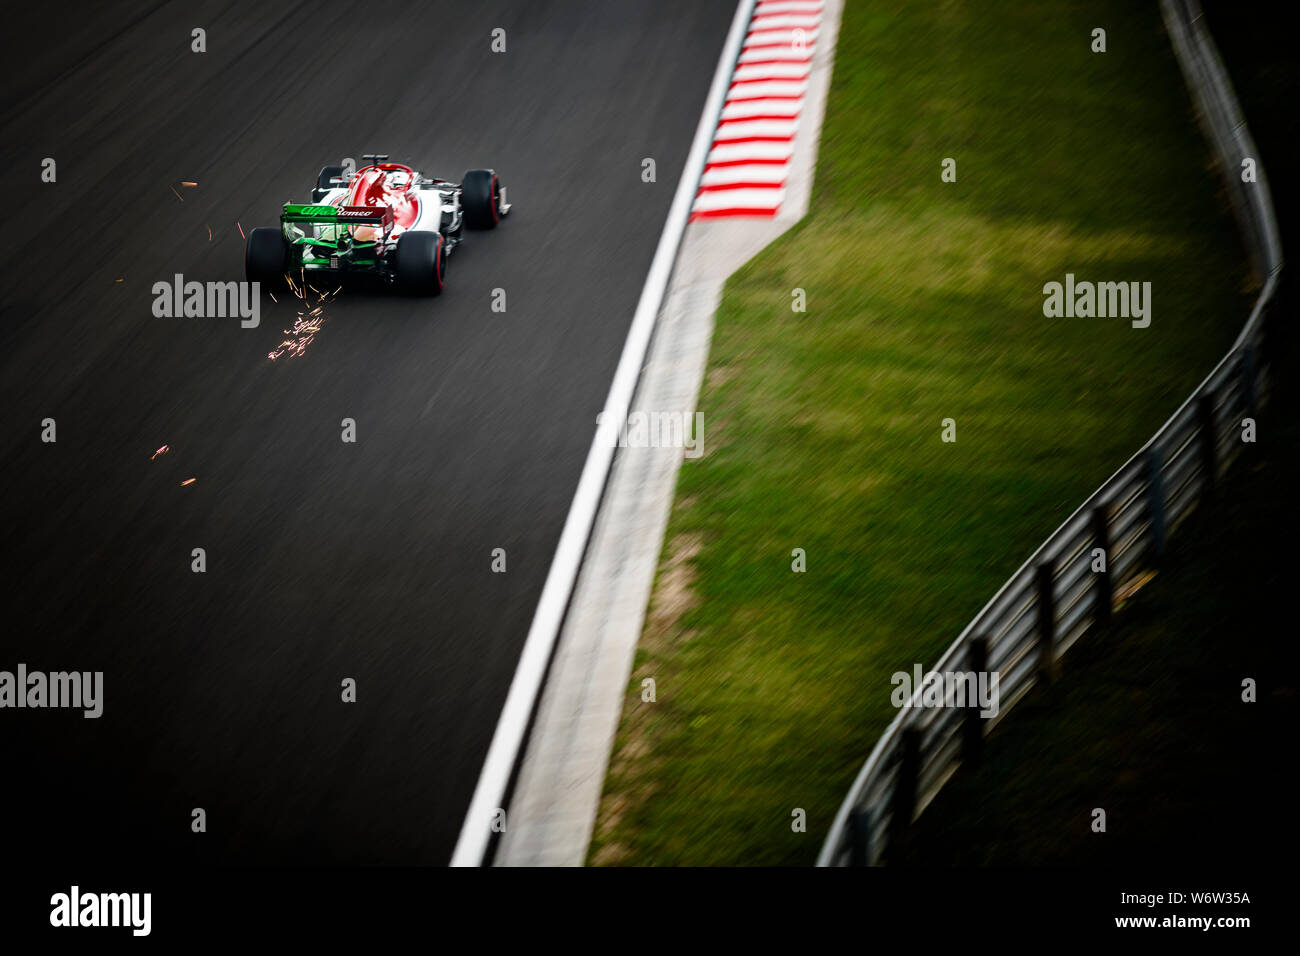 Alfa Romeo Racing's Finnish driver Kimi Raikkonen competes during the first practice session of the Hungarian F1 Grand Prix. Stock Photo